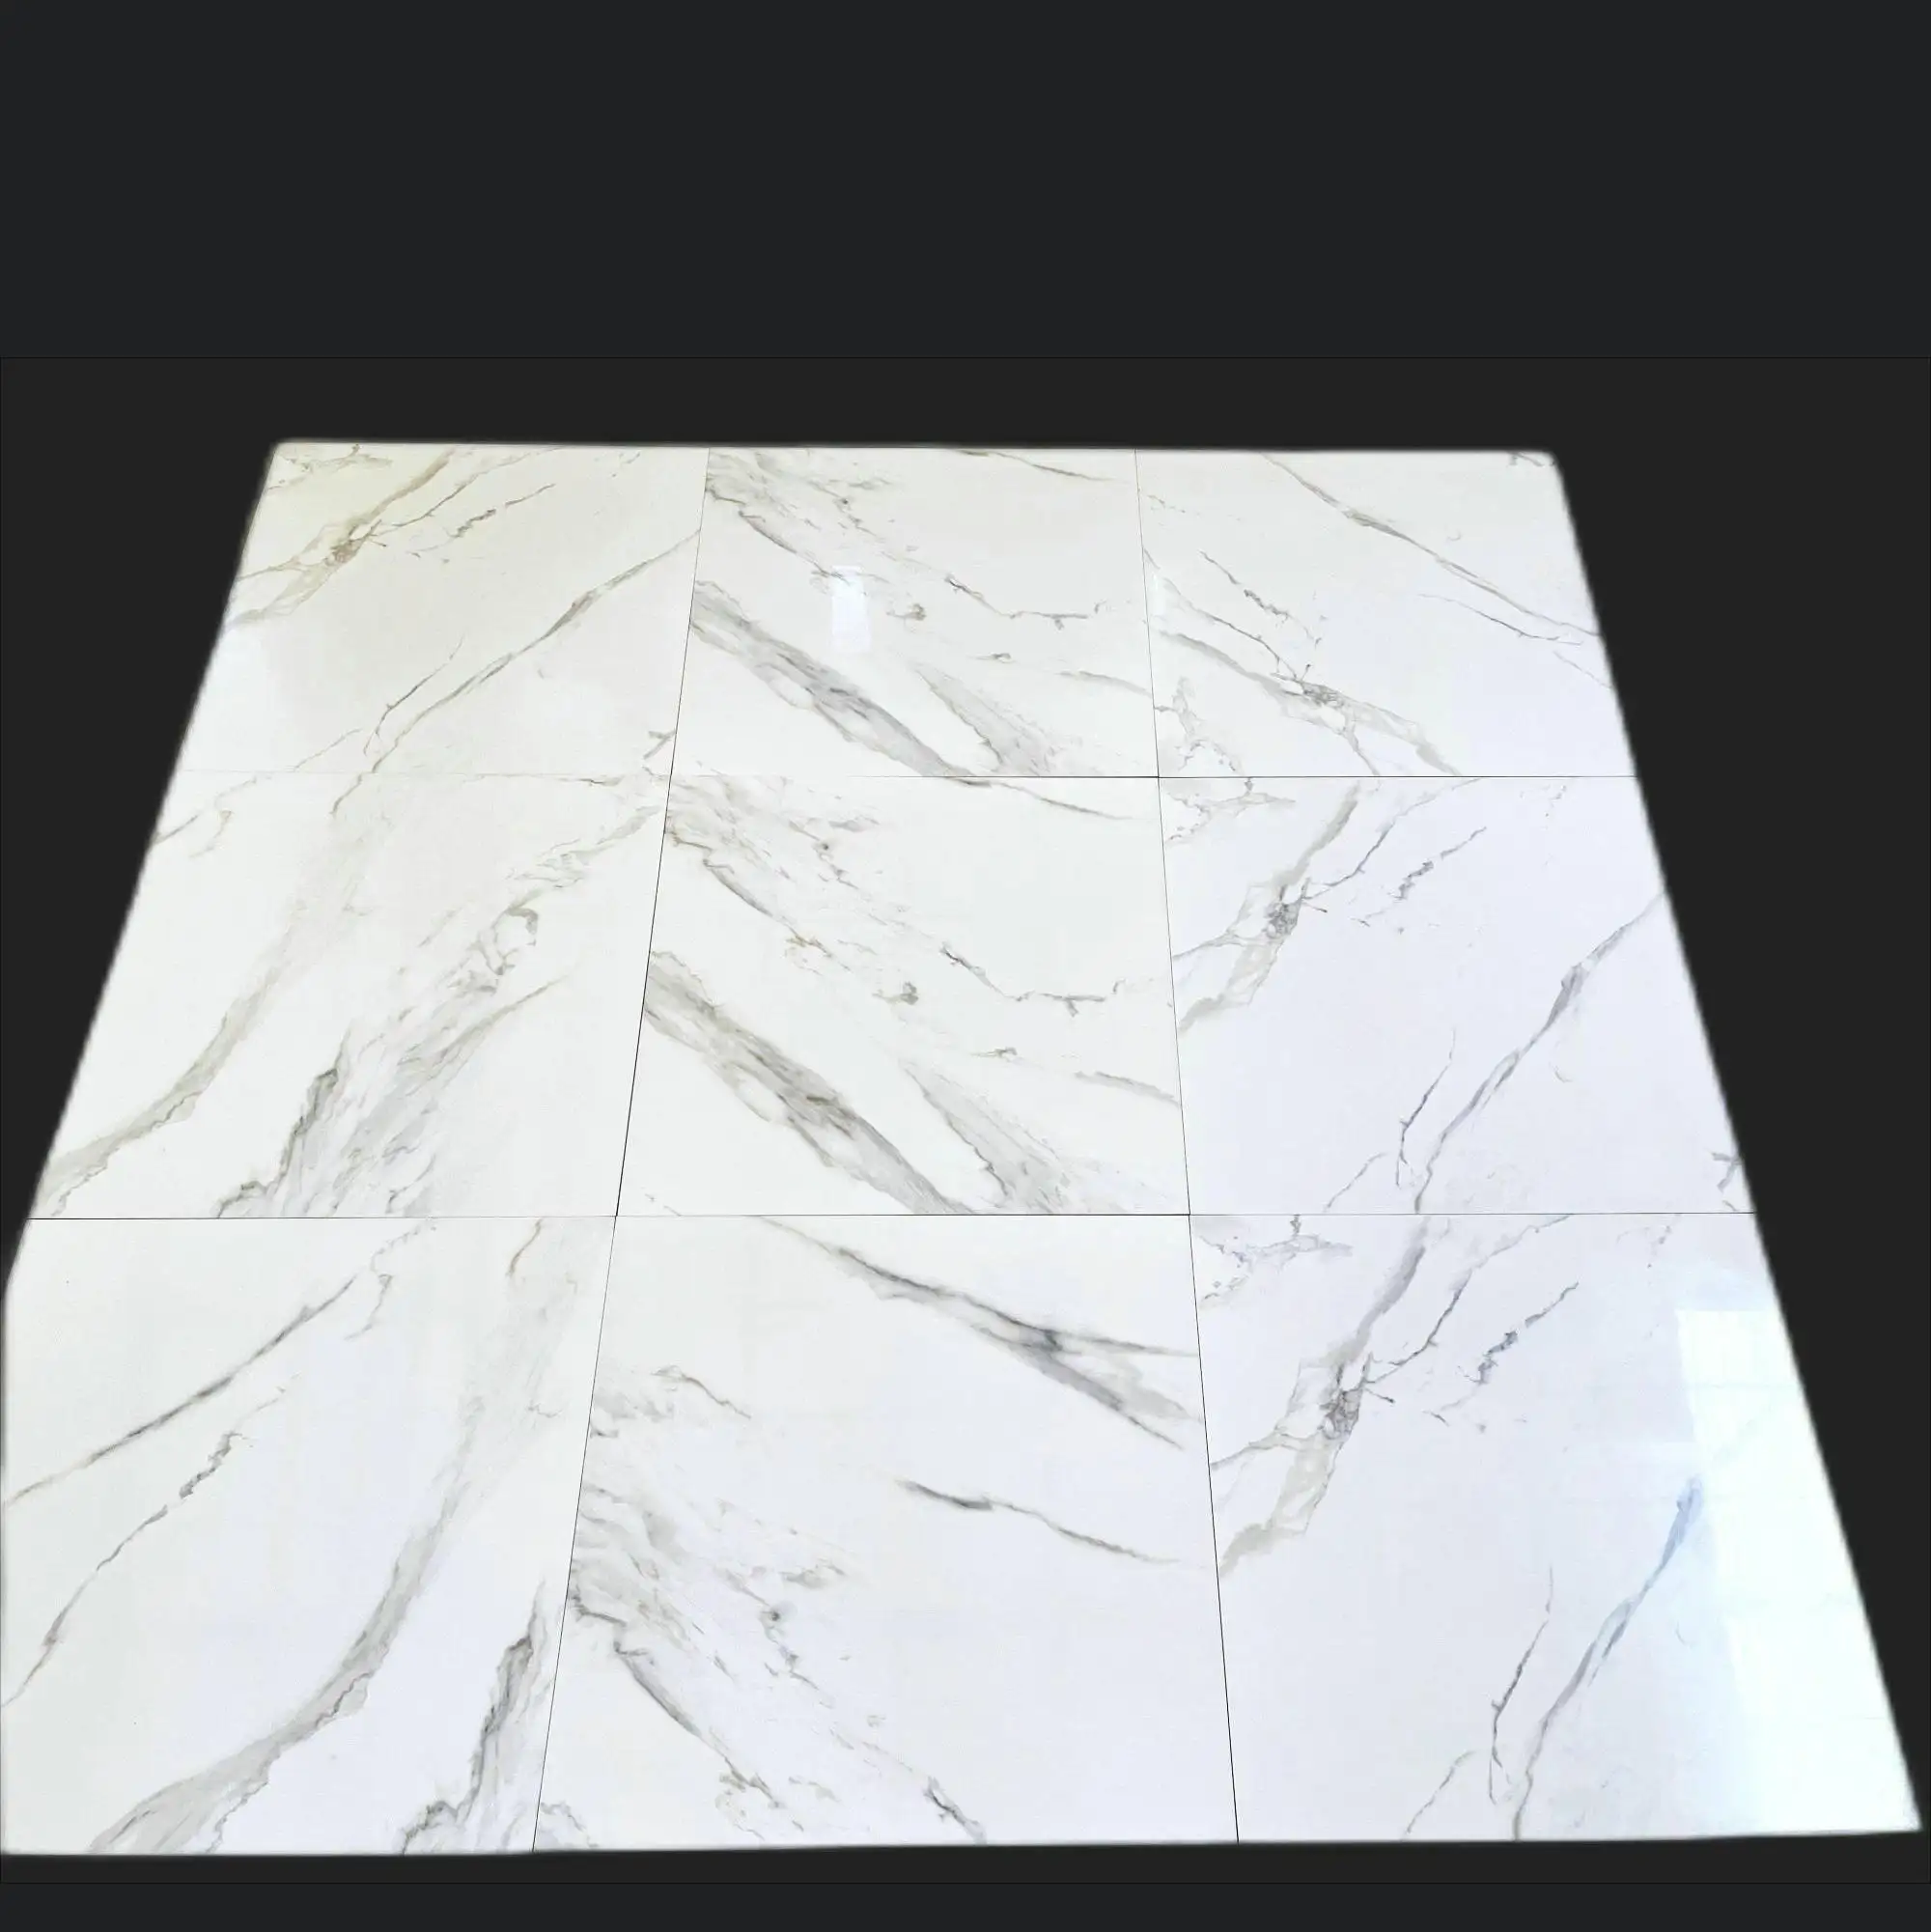 Modern Design Carrara White Marble Look Porcelain Tile 60x60 Carreaux Sol with Glossy Finish 10mm Thick for Floor Application